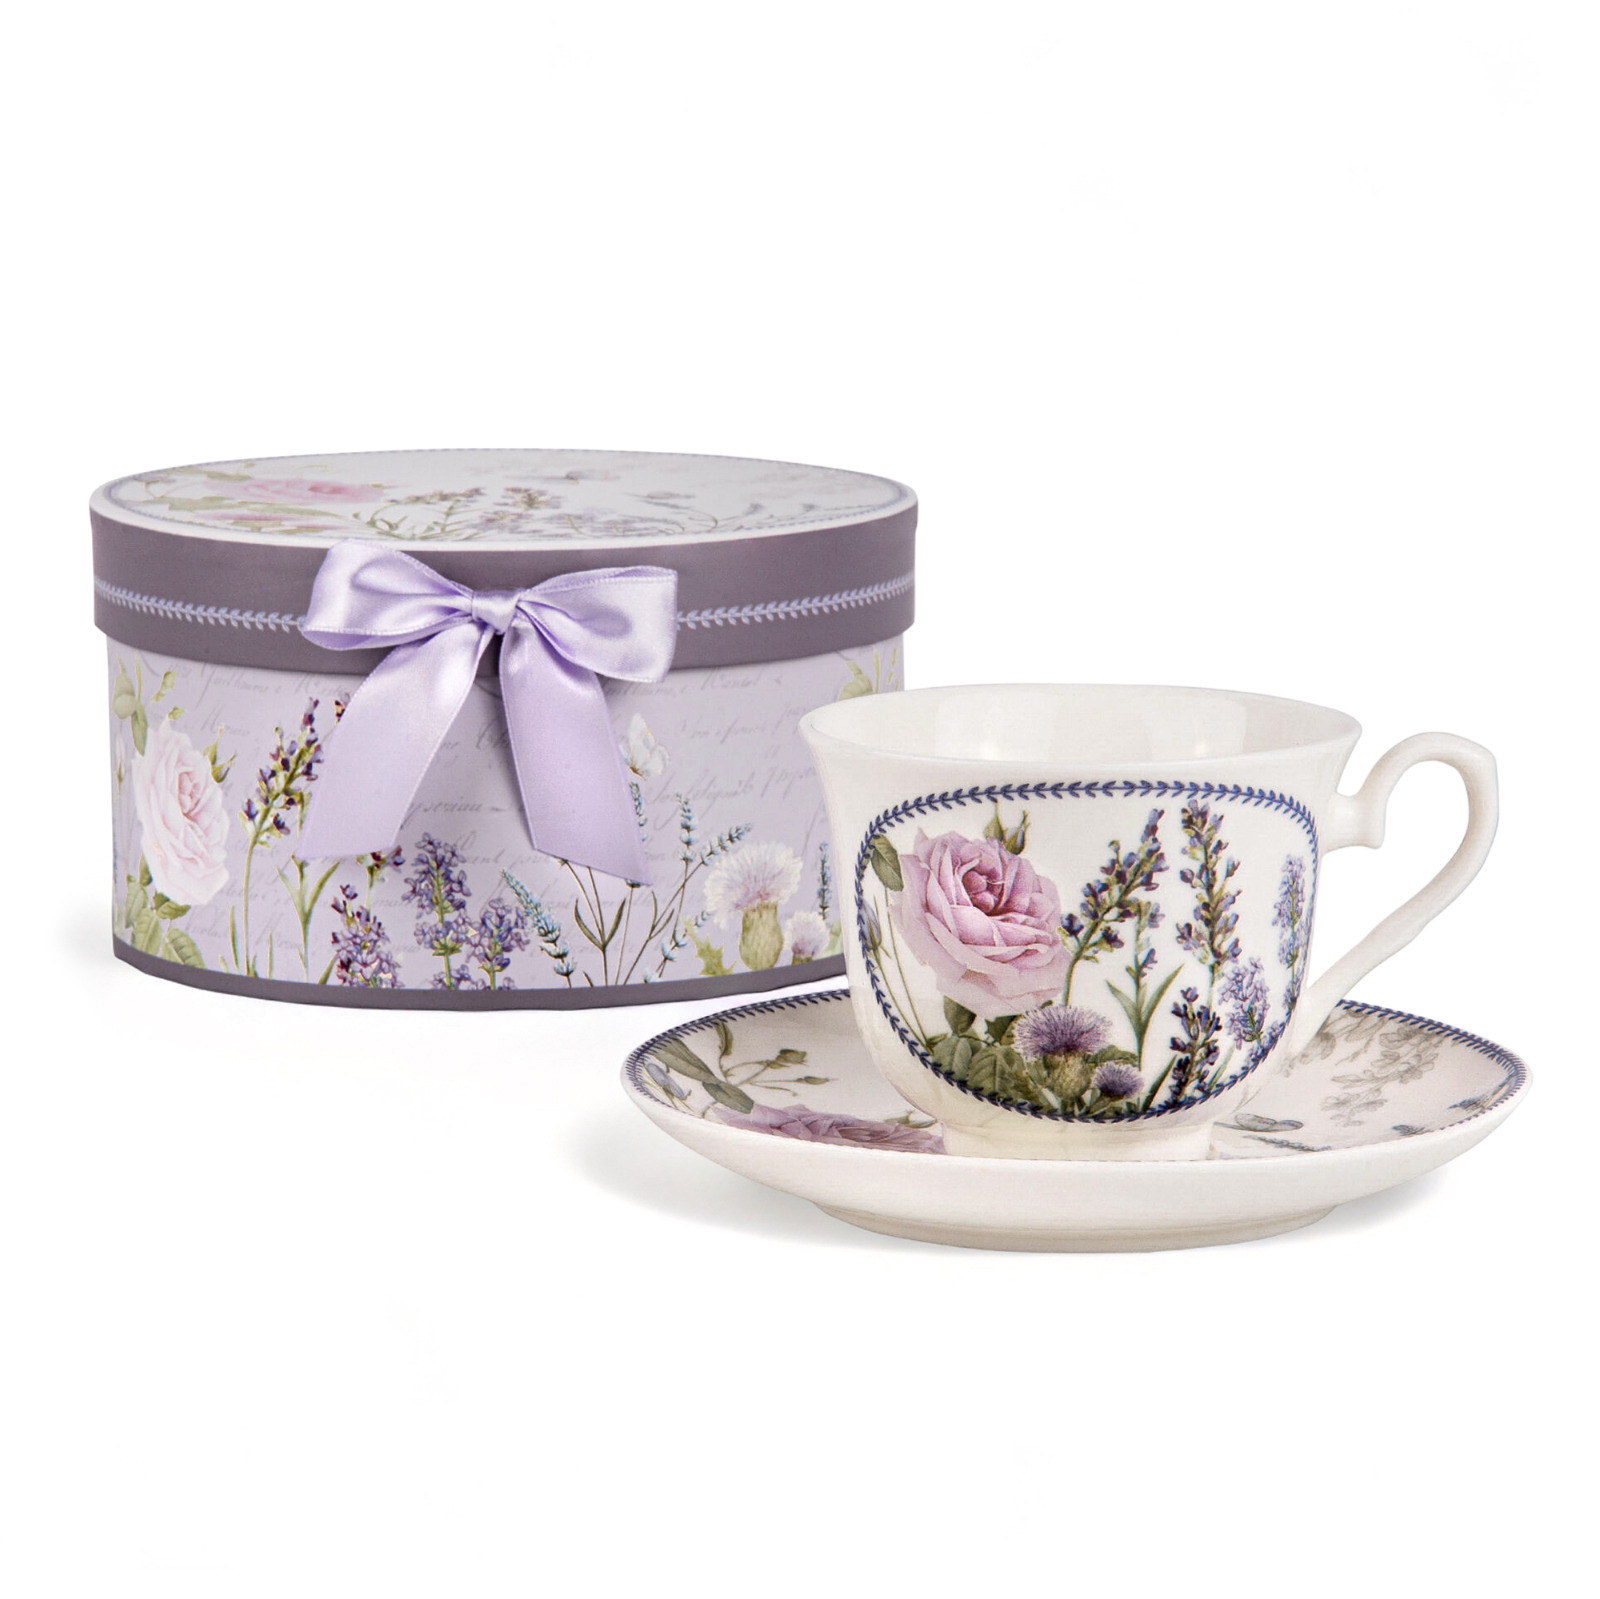 Lavender Rose Bone China Teacup and Saucer in Gift Box 250 ml Porcelain Cup